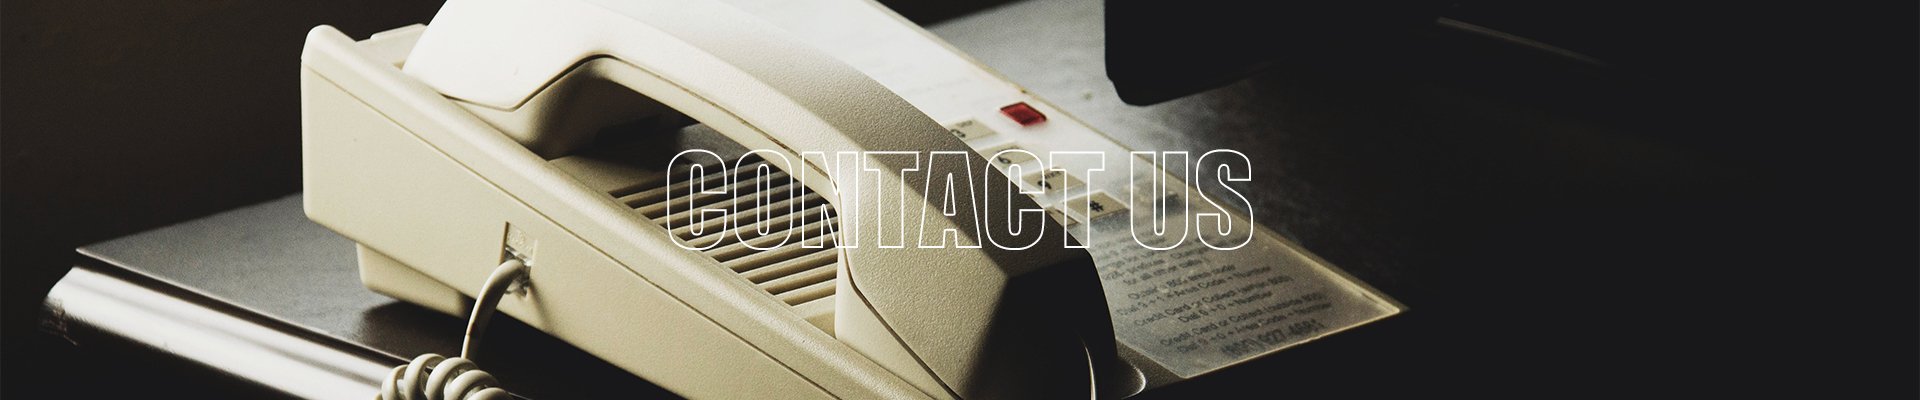 contact-banner